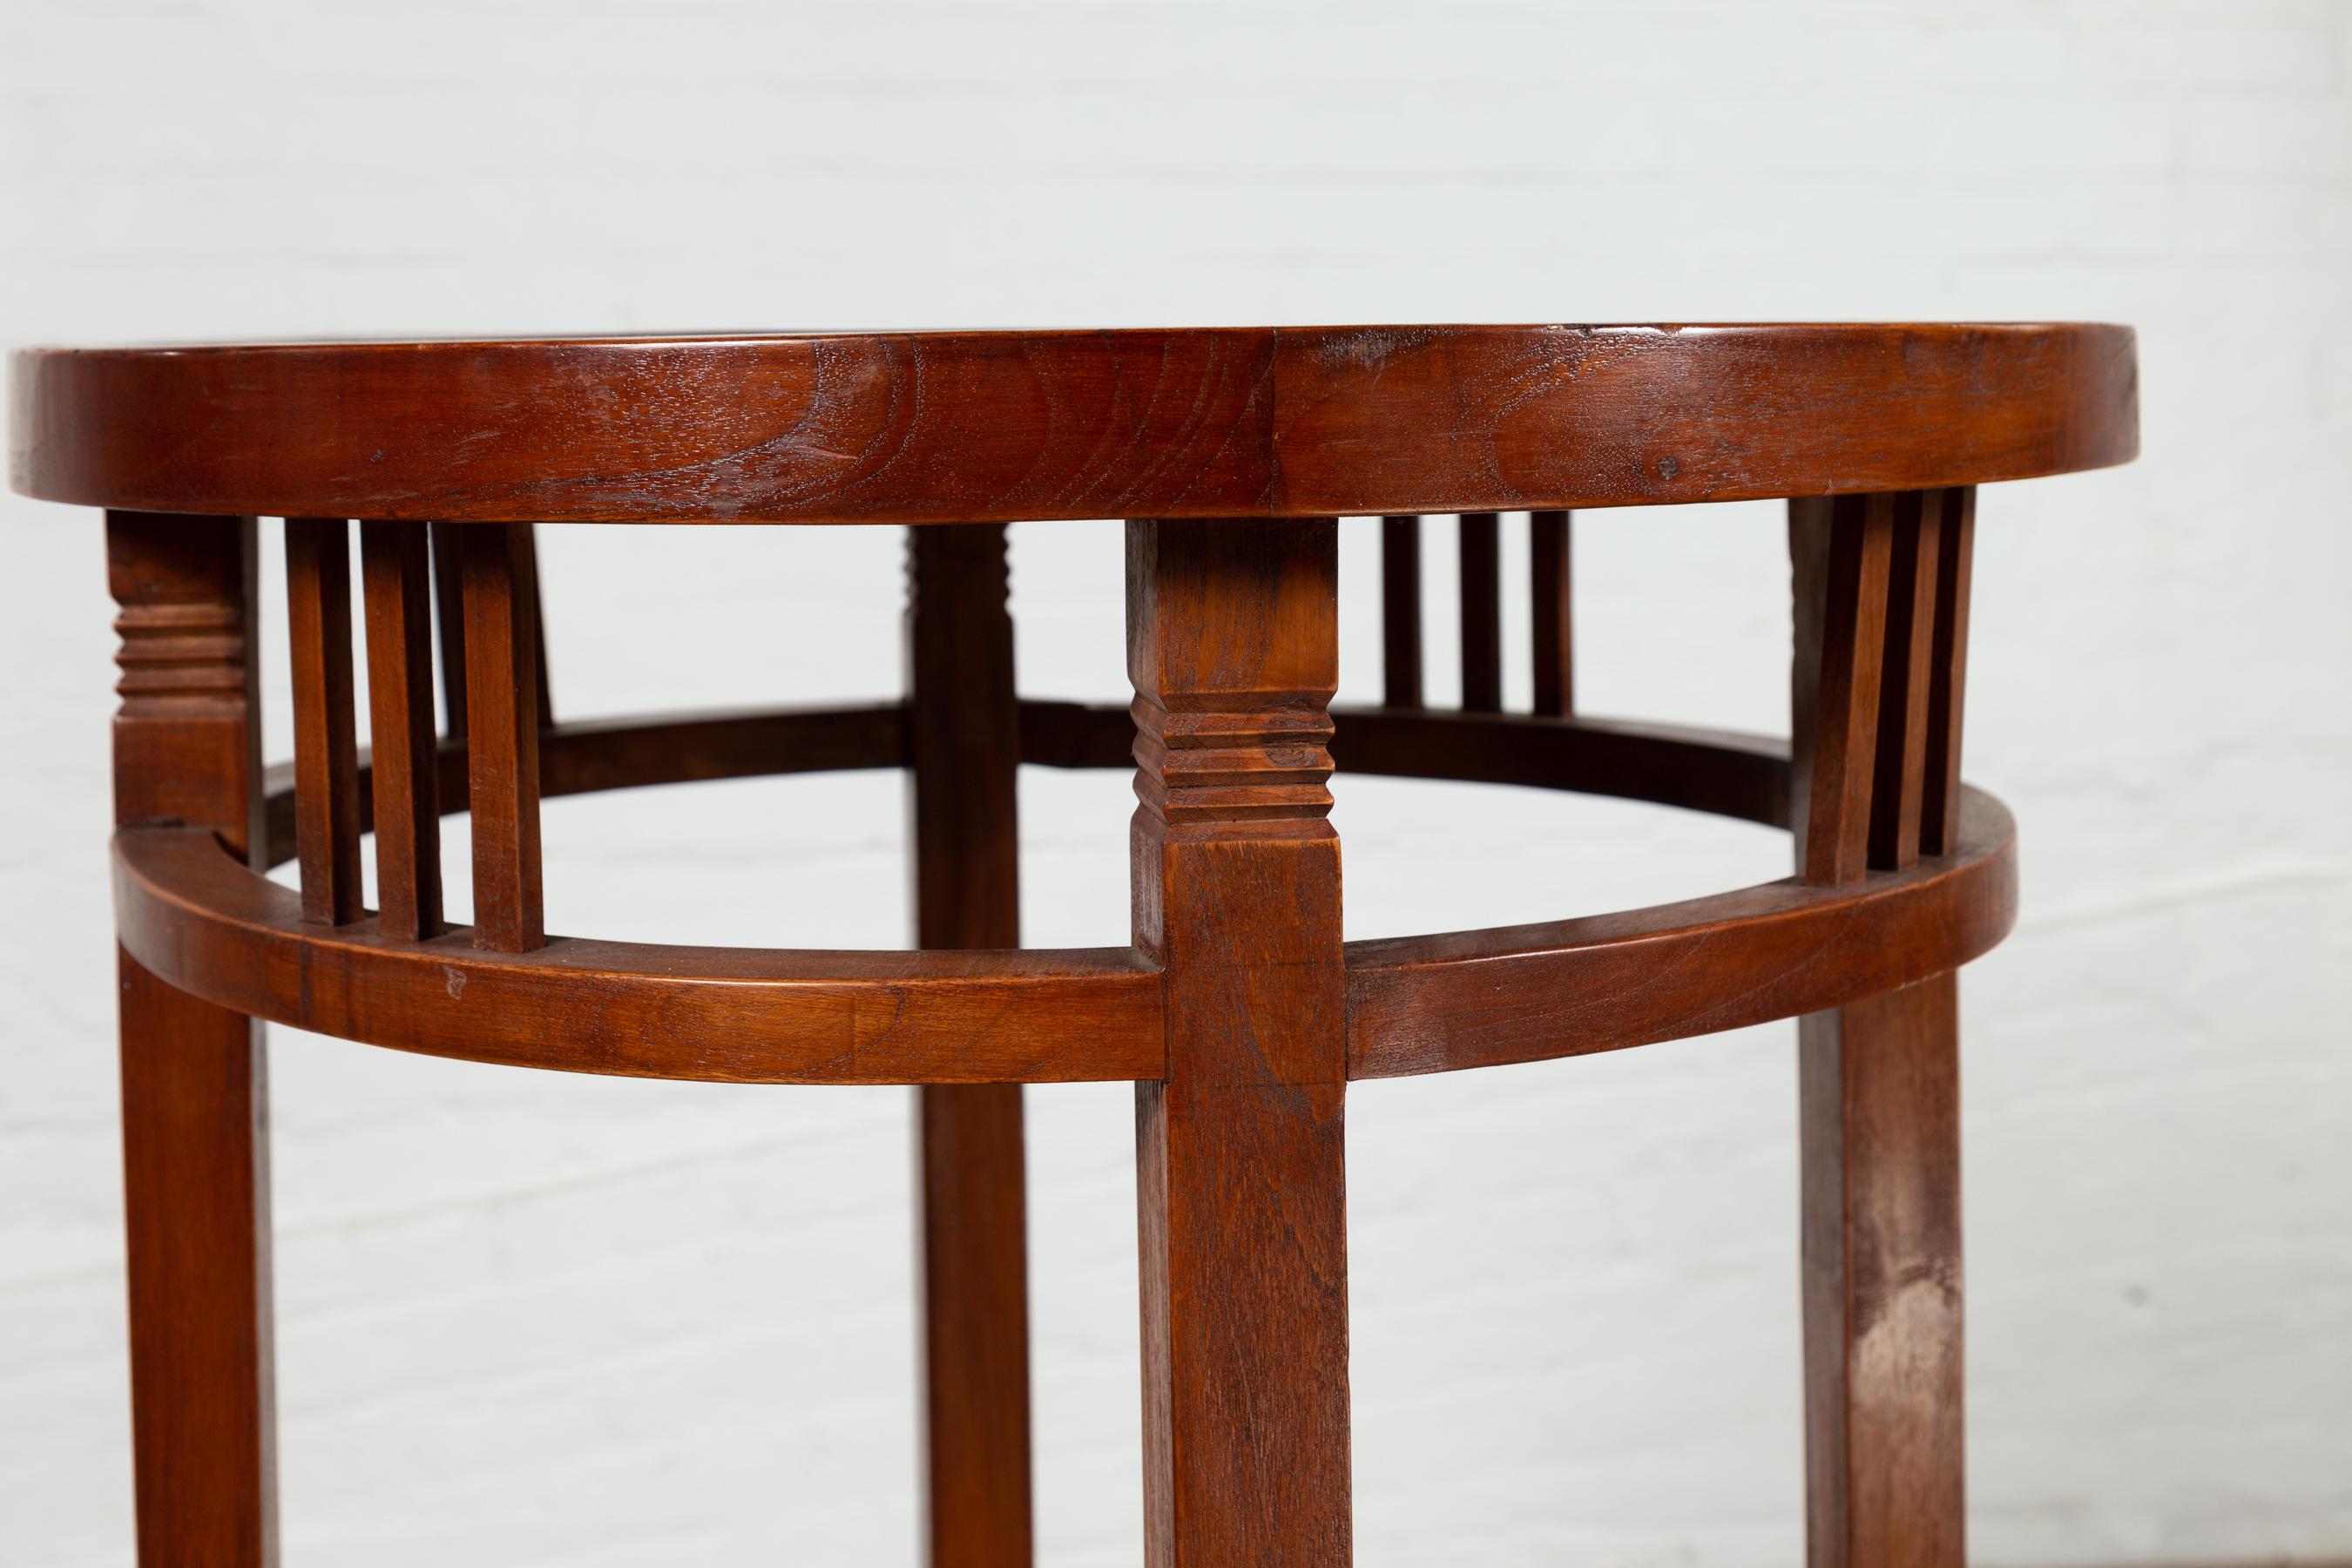 Wood 19th Century Indonesian Round Pedestal Table with Pierced Apron and Stretchers For Sale